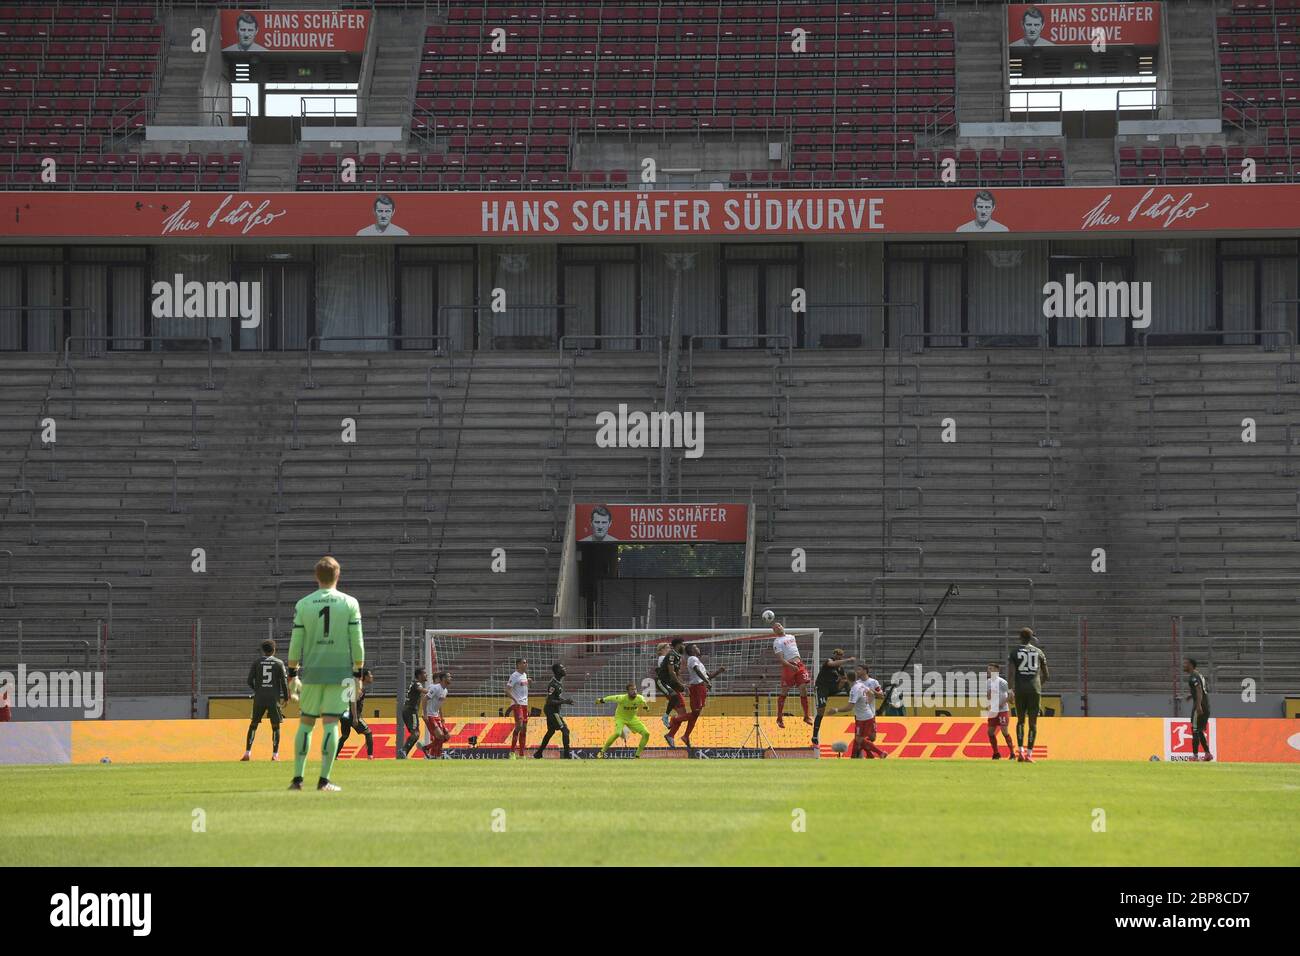 general game scene against a ghost backdrop. Empty stadium, empty ranks, penalty area scene in front of the Hans Schaefer Suedkurve, Schvssfer Svºdkurve, fan curve, action, football 1.Bundesliga, 26.matchday, FC Cologne (K) - FSV FSV FSV Mainz 05 2: 2, on May 17, 2020 in Cologne/Germany. Photo: Anke Waelischmiller/SVEN SIMON/Pool For journalistic purposes only! Only for editorial use! According to the requirements of the DFL Deutsche Fuvuball Liga, it is prohibited to use or have photos taken in the stadium and/or photos taken by the game in the form of sequence pictures and/or video Stock Photo